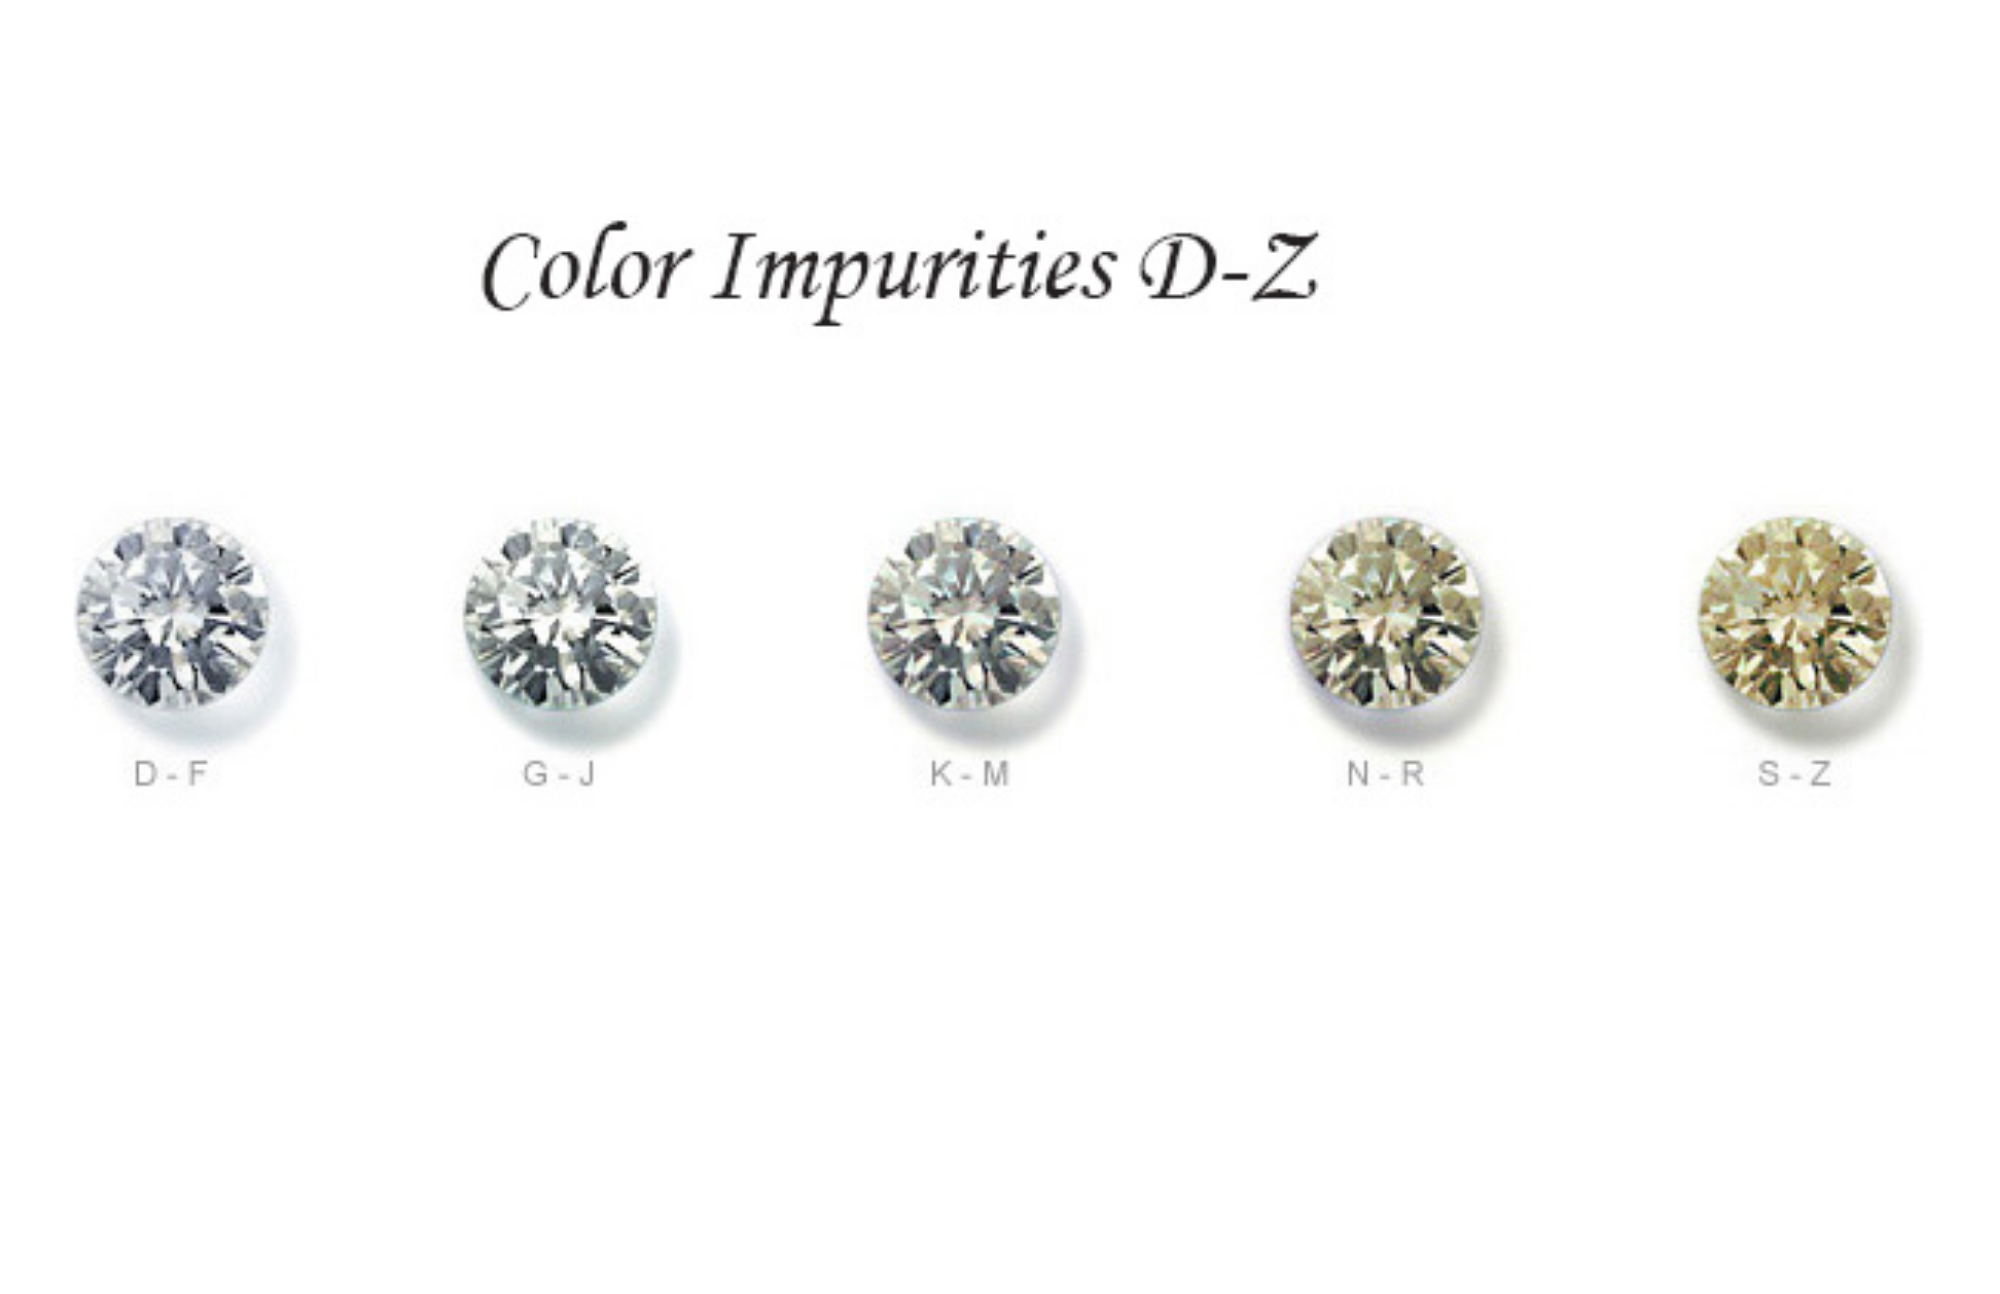 Five different colors of Diamonds from D-Z